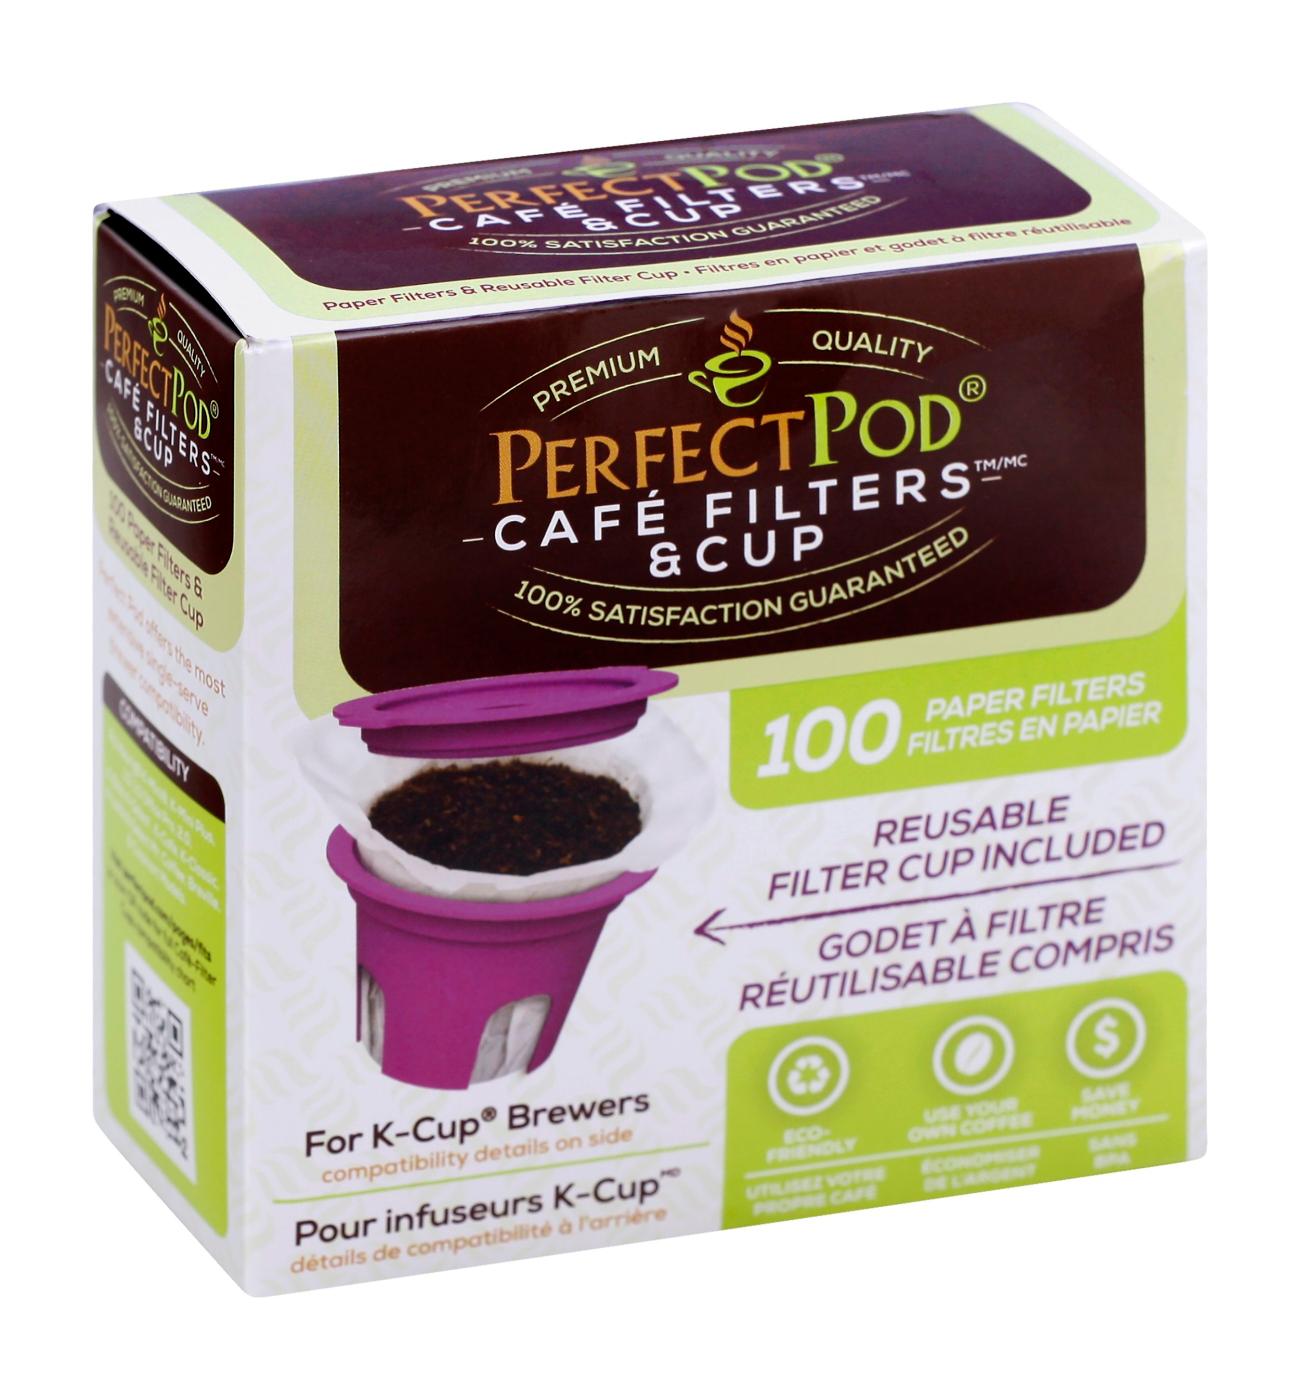 Perfect Pod Cafe Filters & Cup Value Pack; image 2 of 4